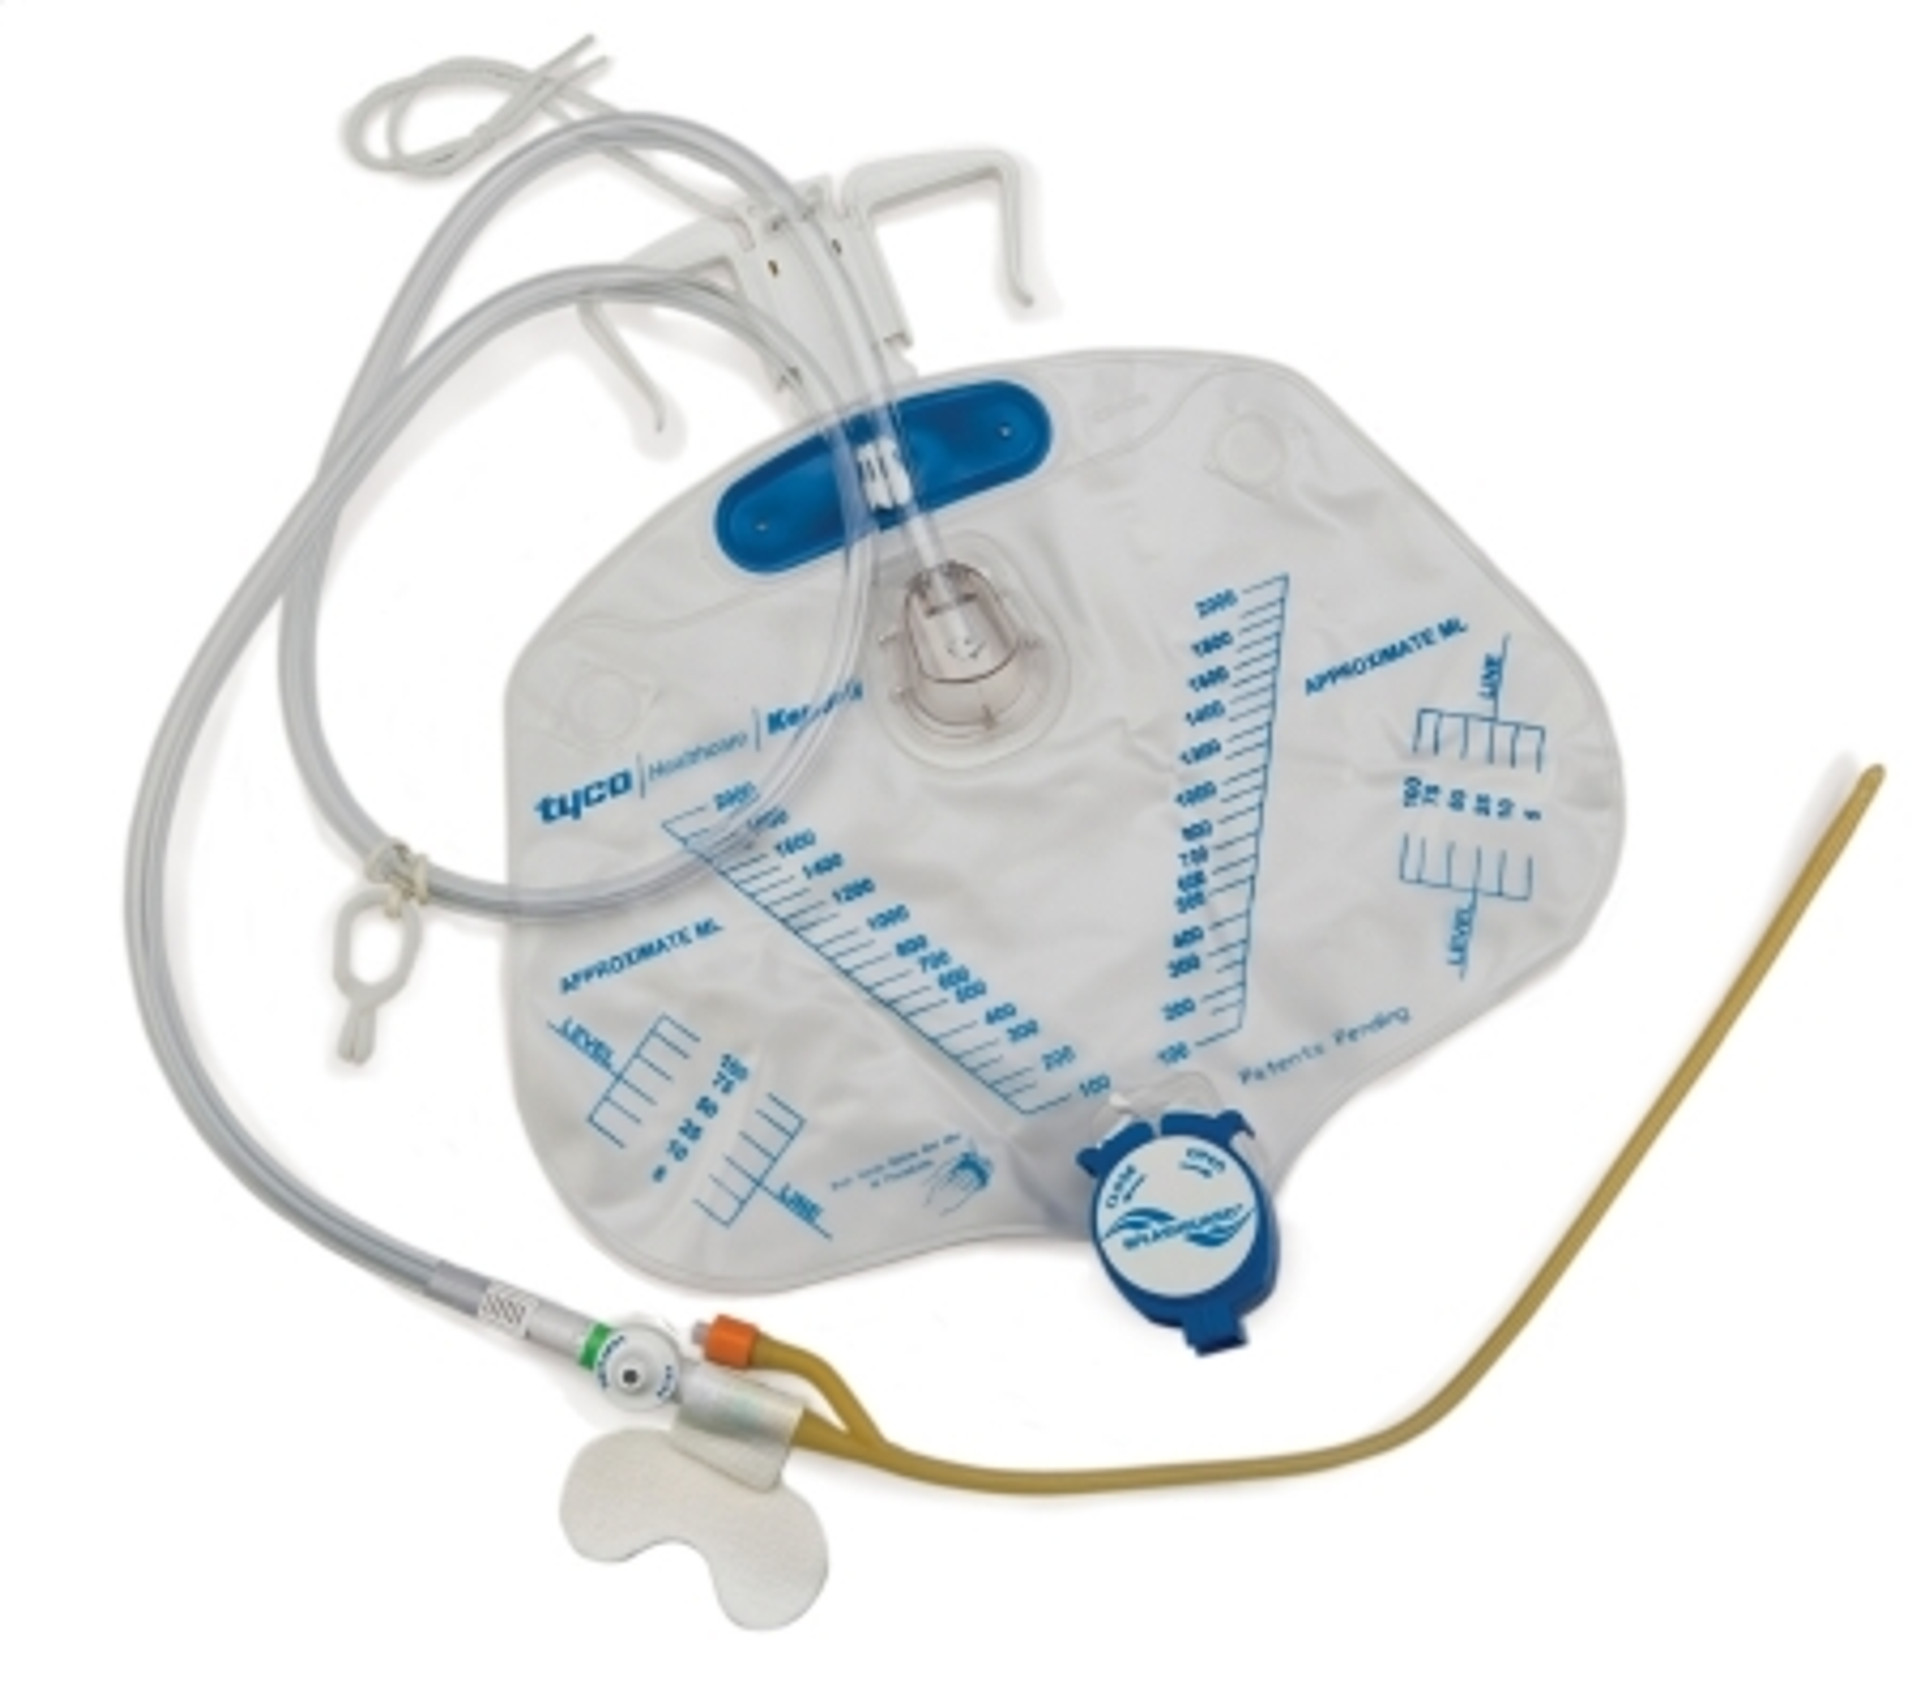 Chest Tube Insertion Tray by Cook Medical Incorporated